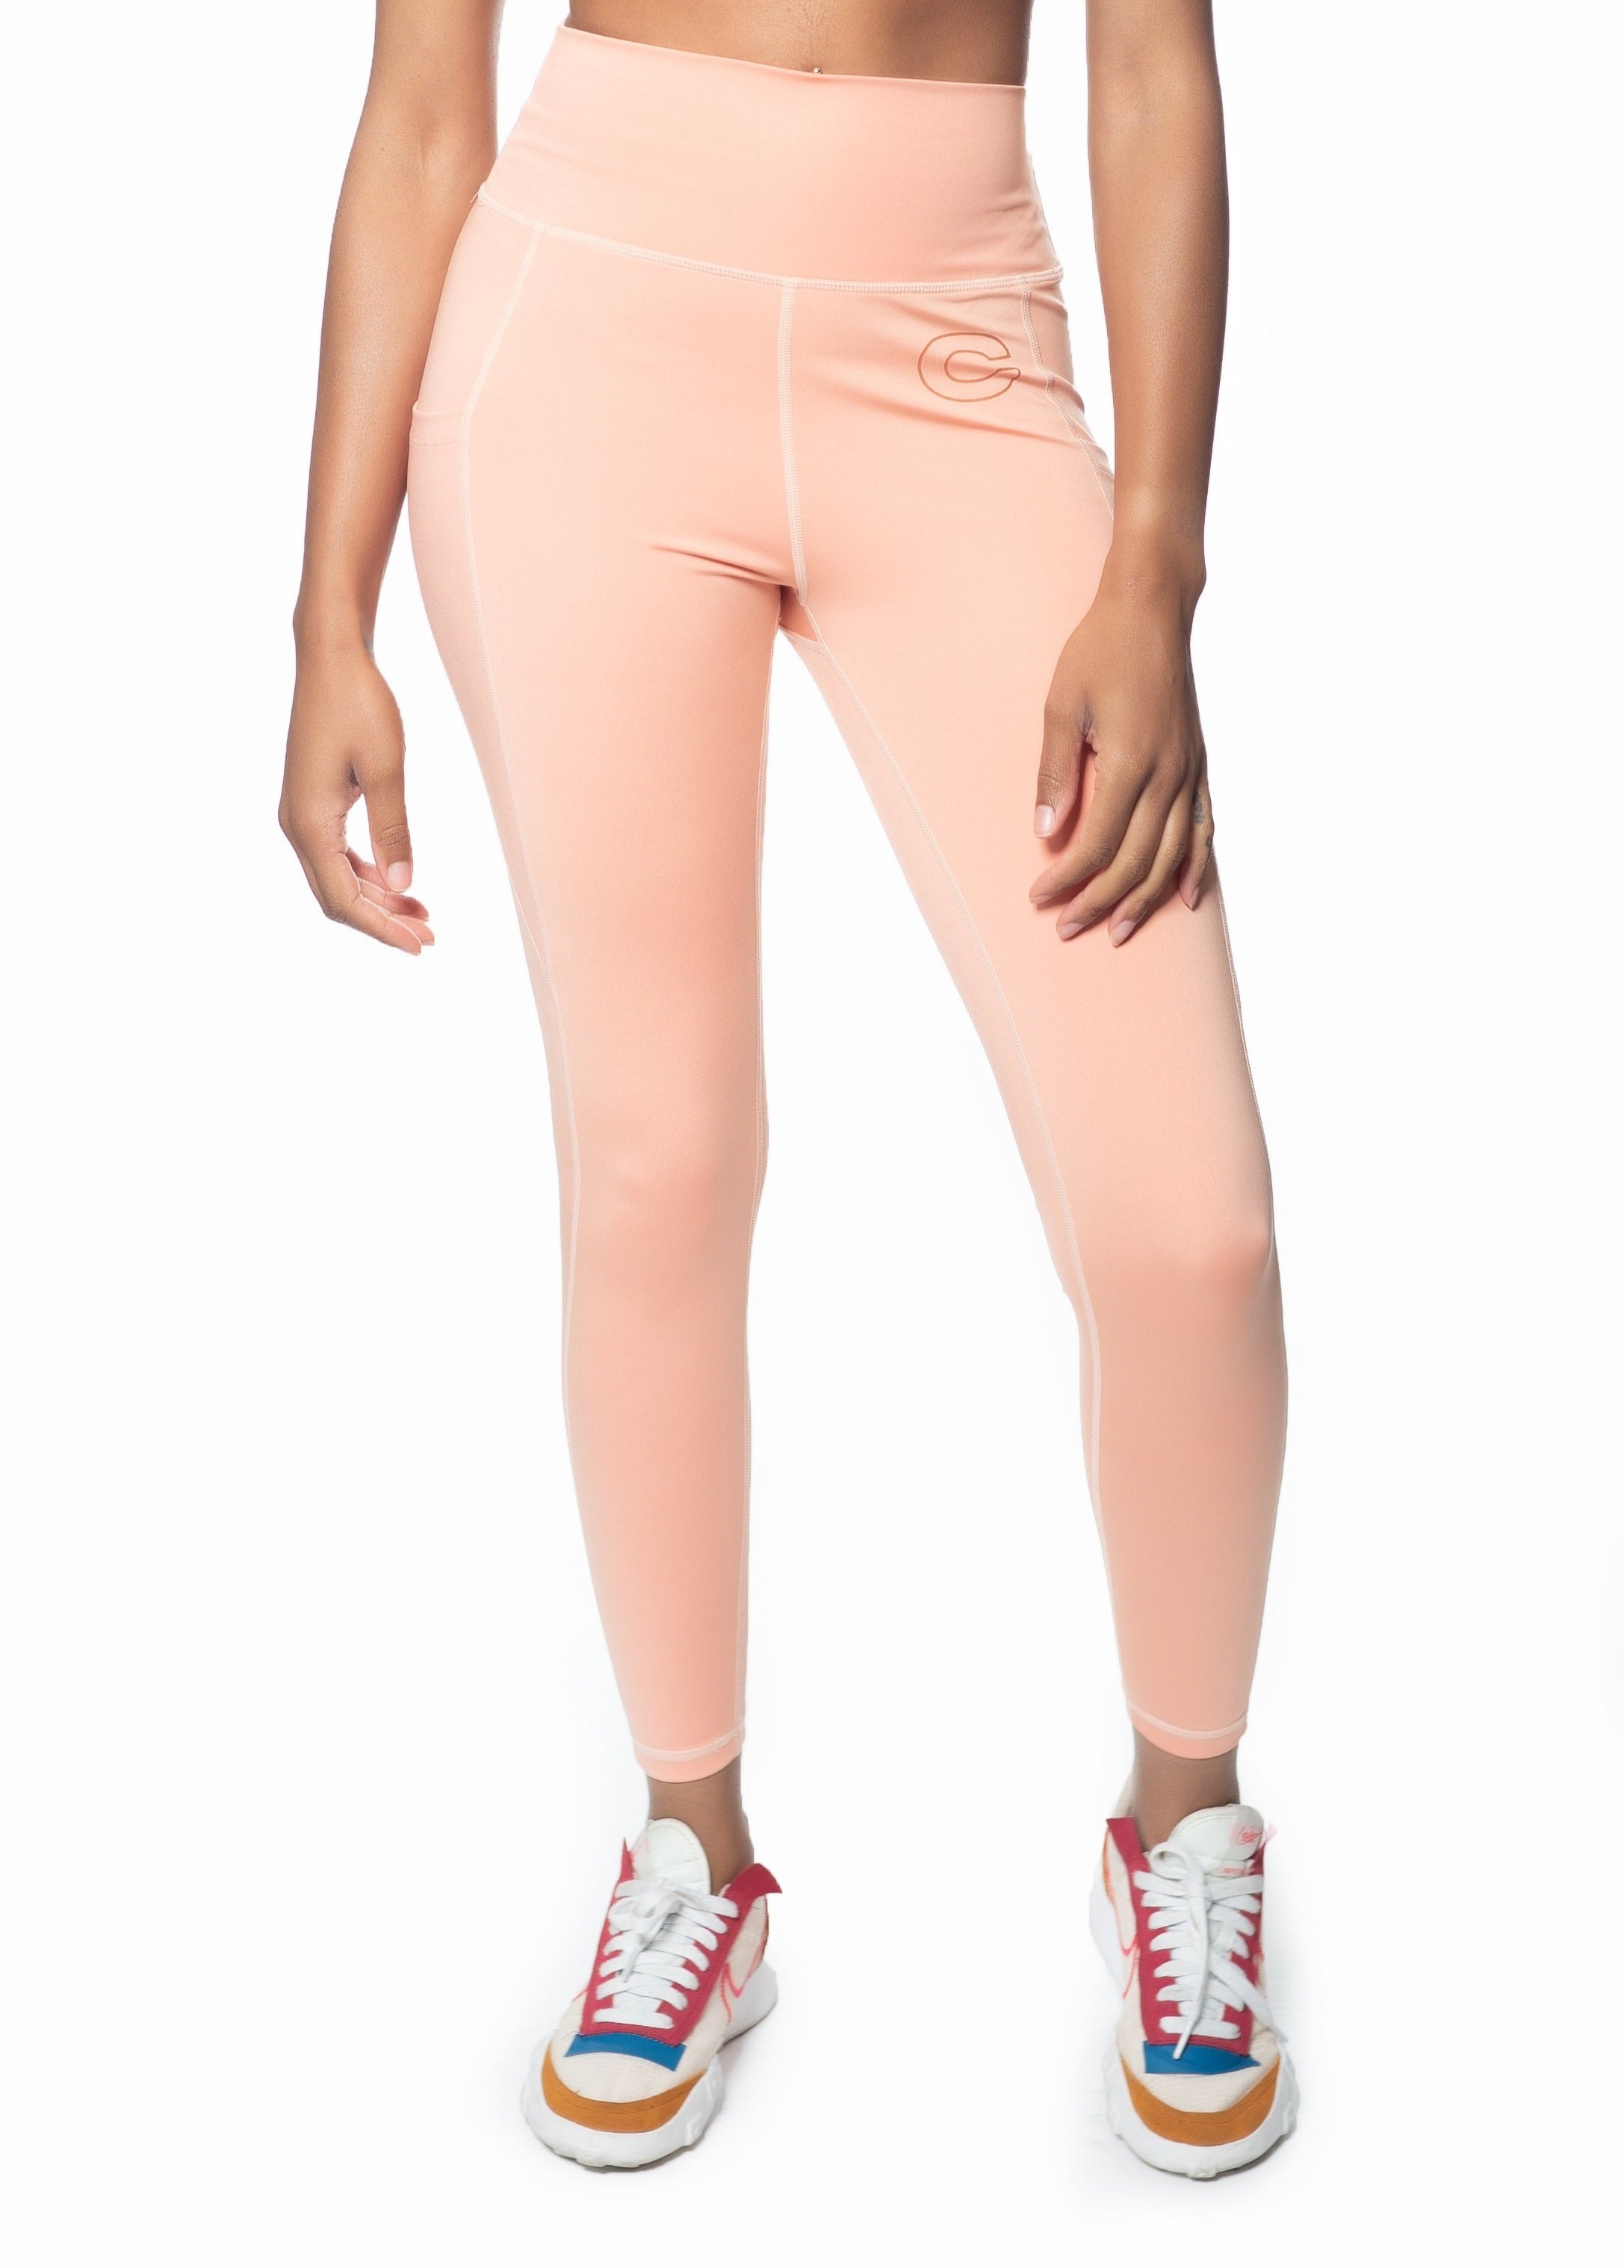 CLAIRE ACTIVE LEGGINGS - Courtsmith